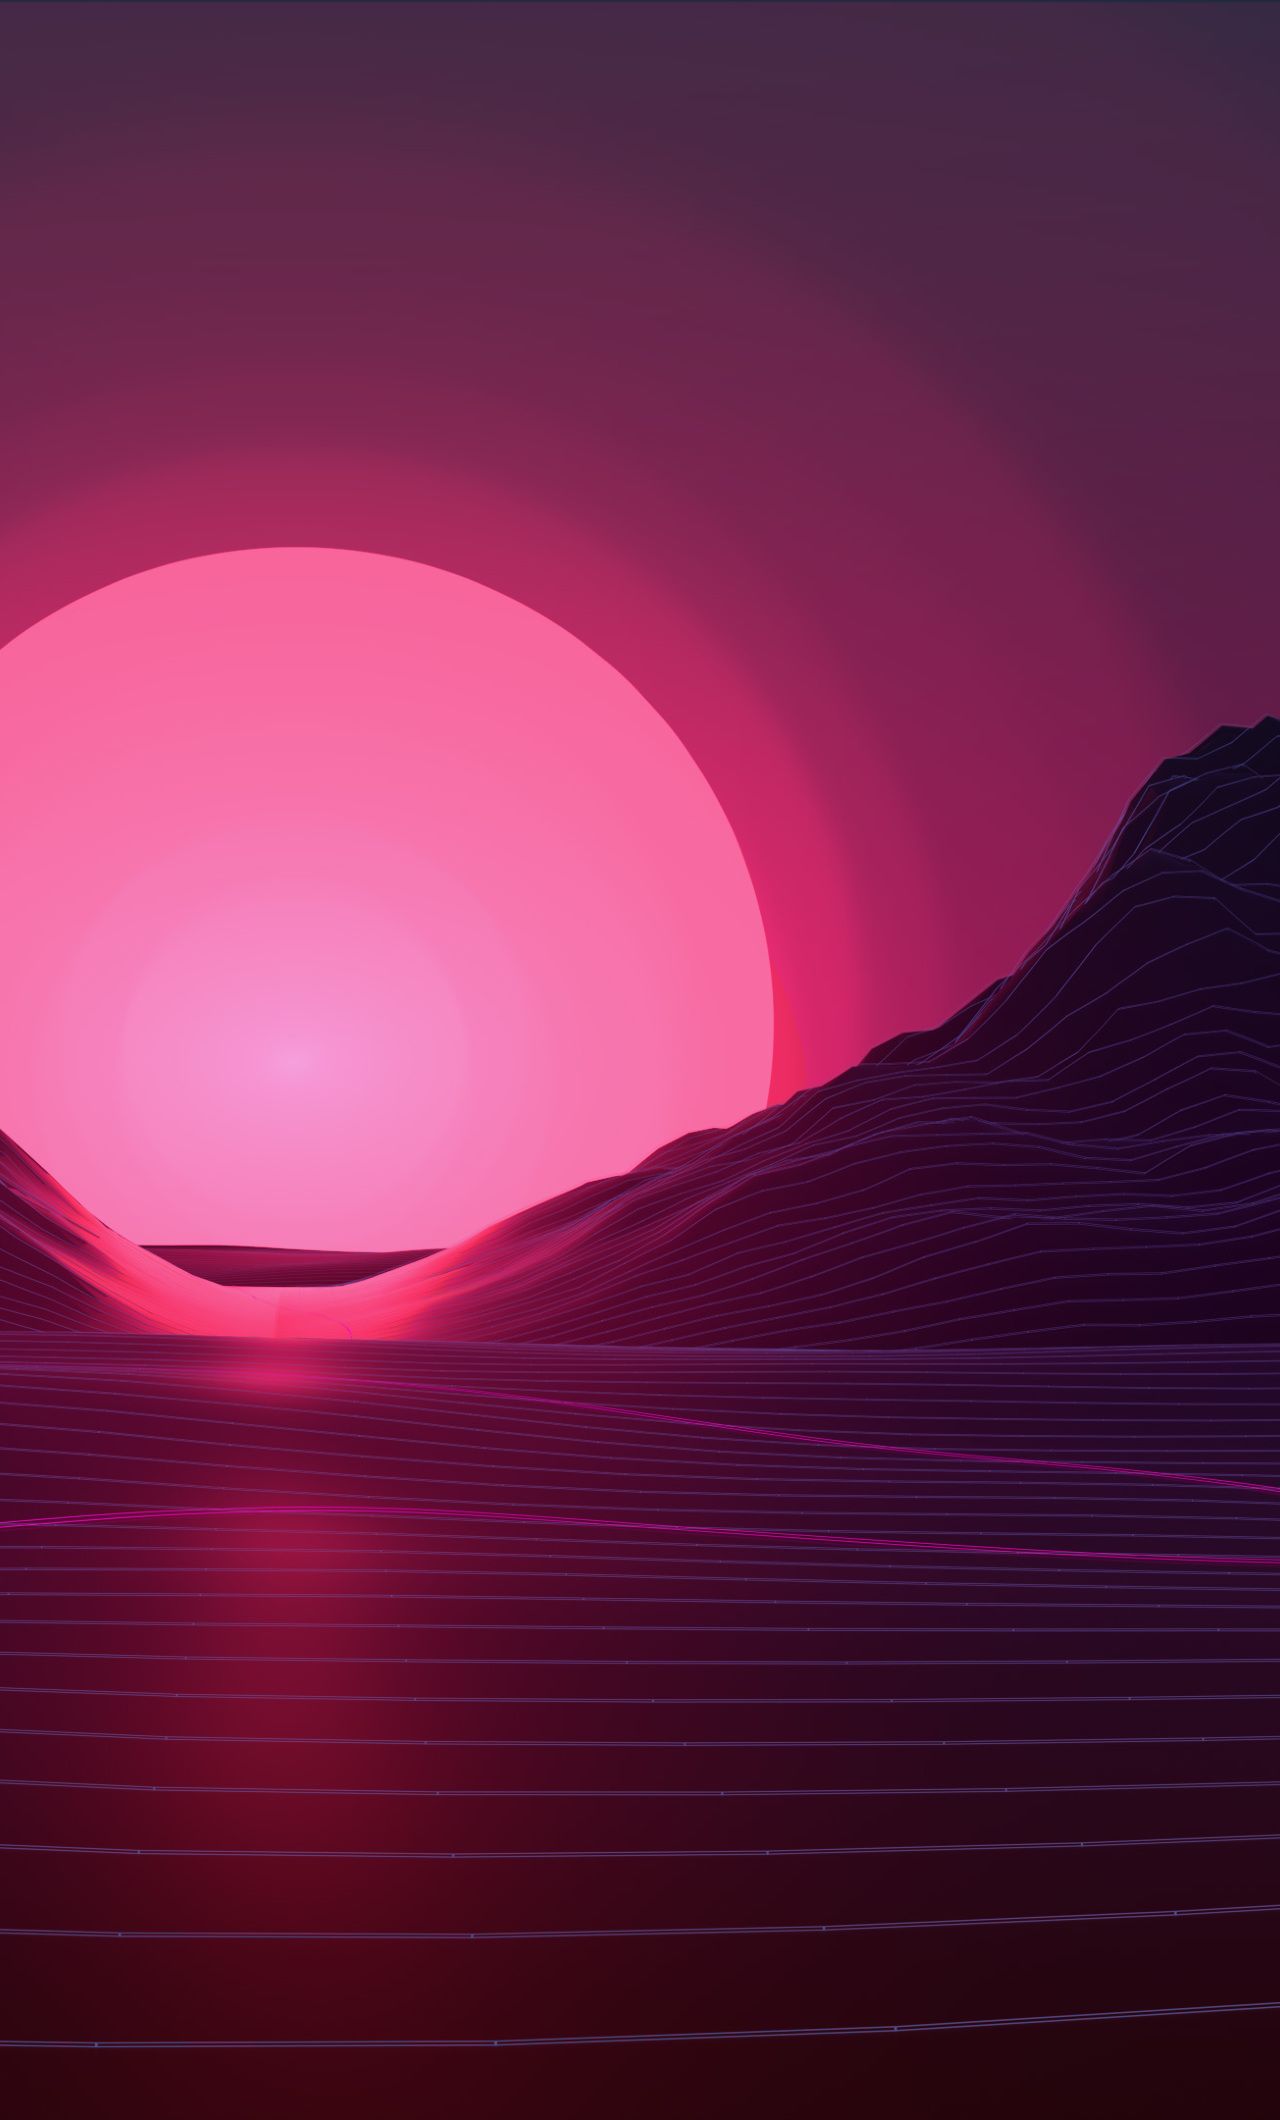 Sun In Retro Wave Mountains iPhone 6 plus Wallpaper, HD Artist 4K Wallpaper, Image, Photo and Background